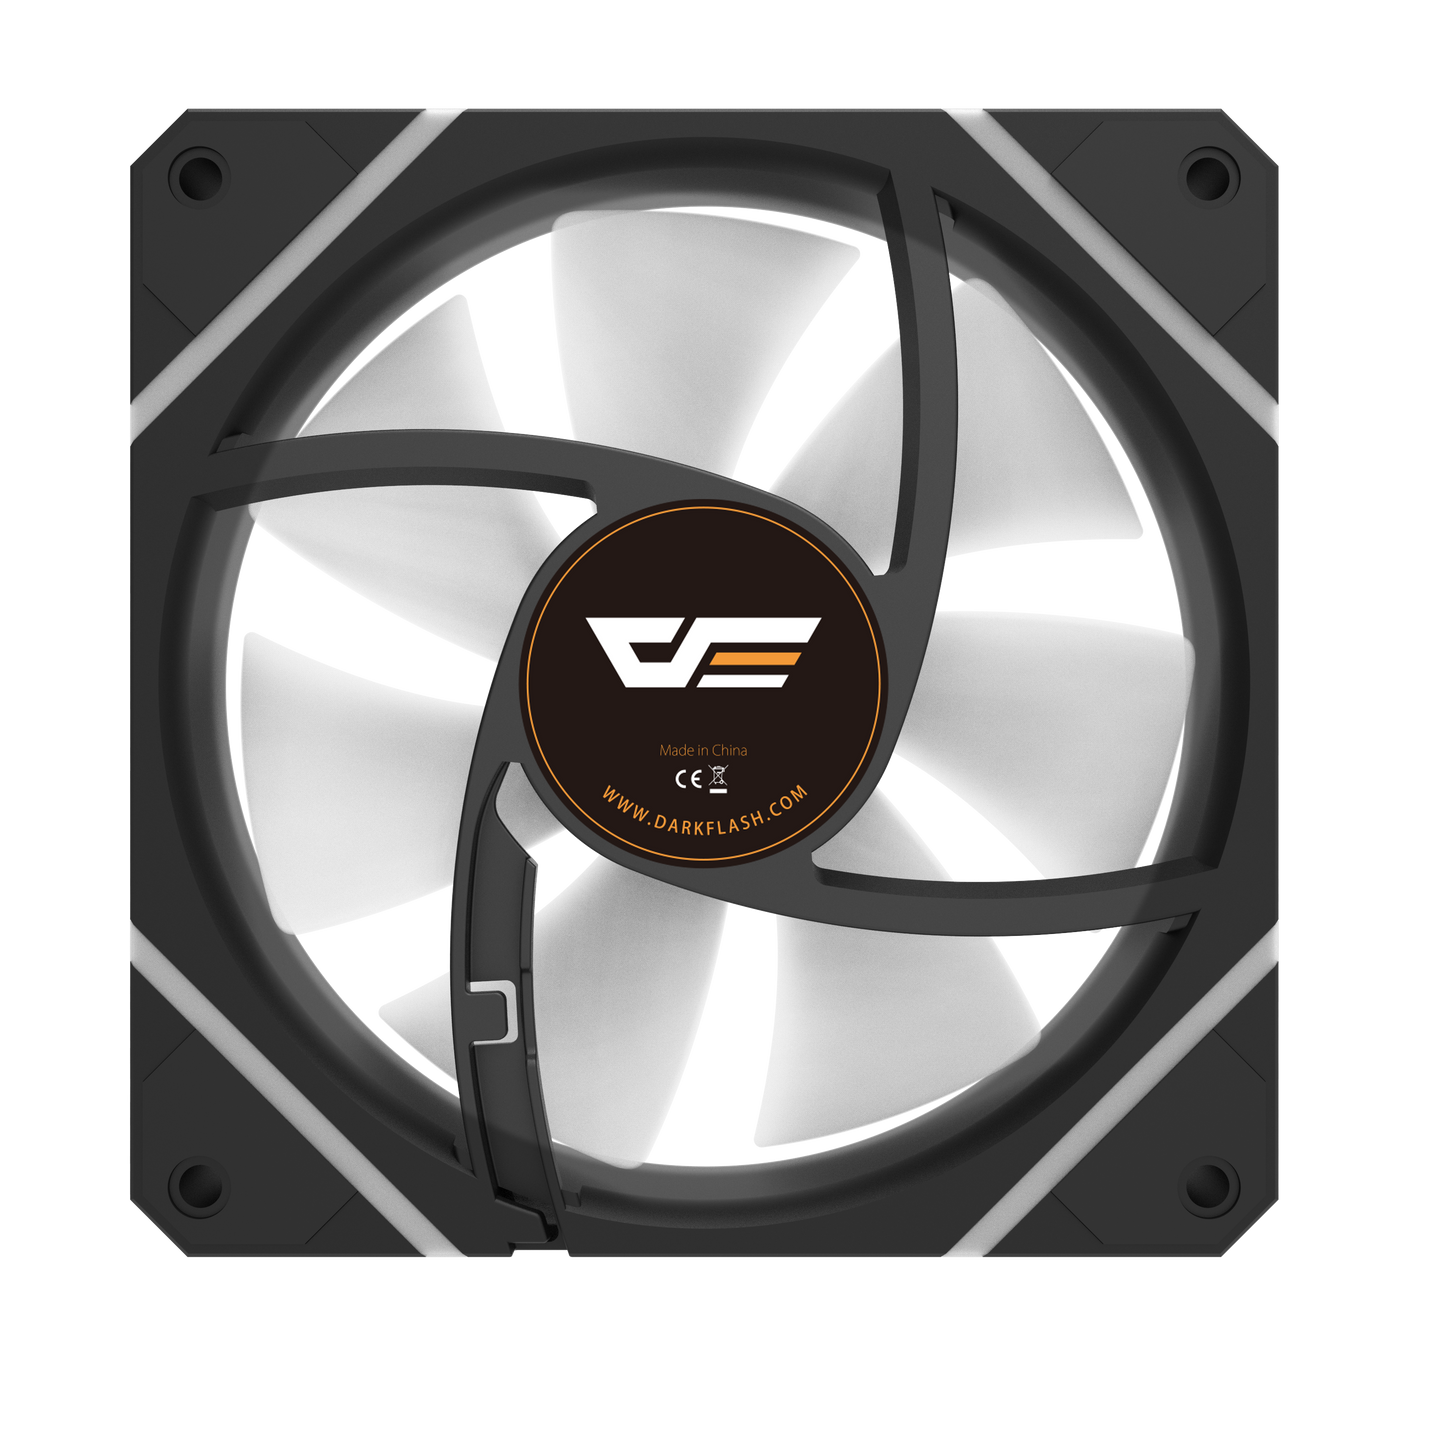 DarkFlash DM12F 3-Pack ARGB Computer Case Fan 120mm Cooling Fan with Remote Controller (Black)